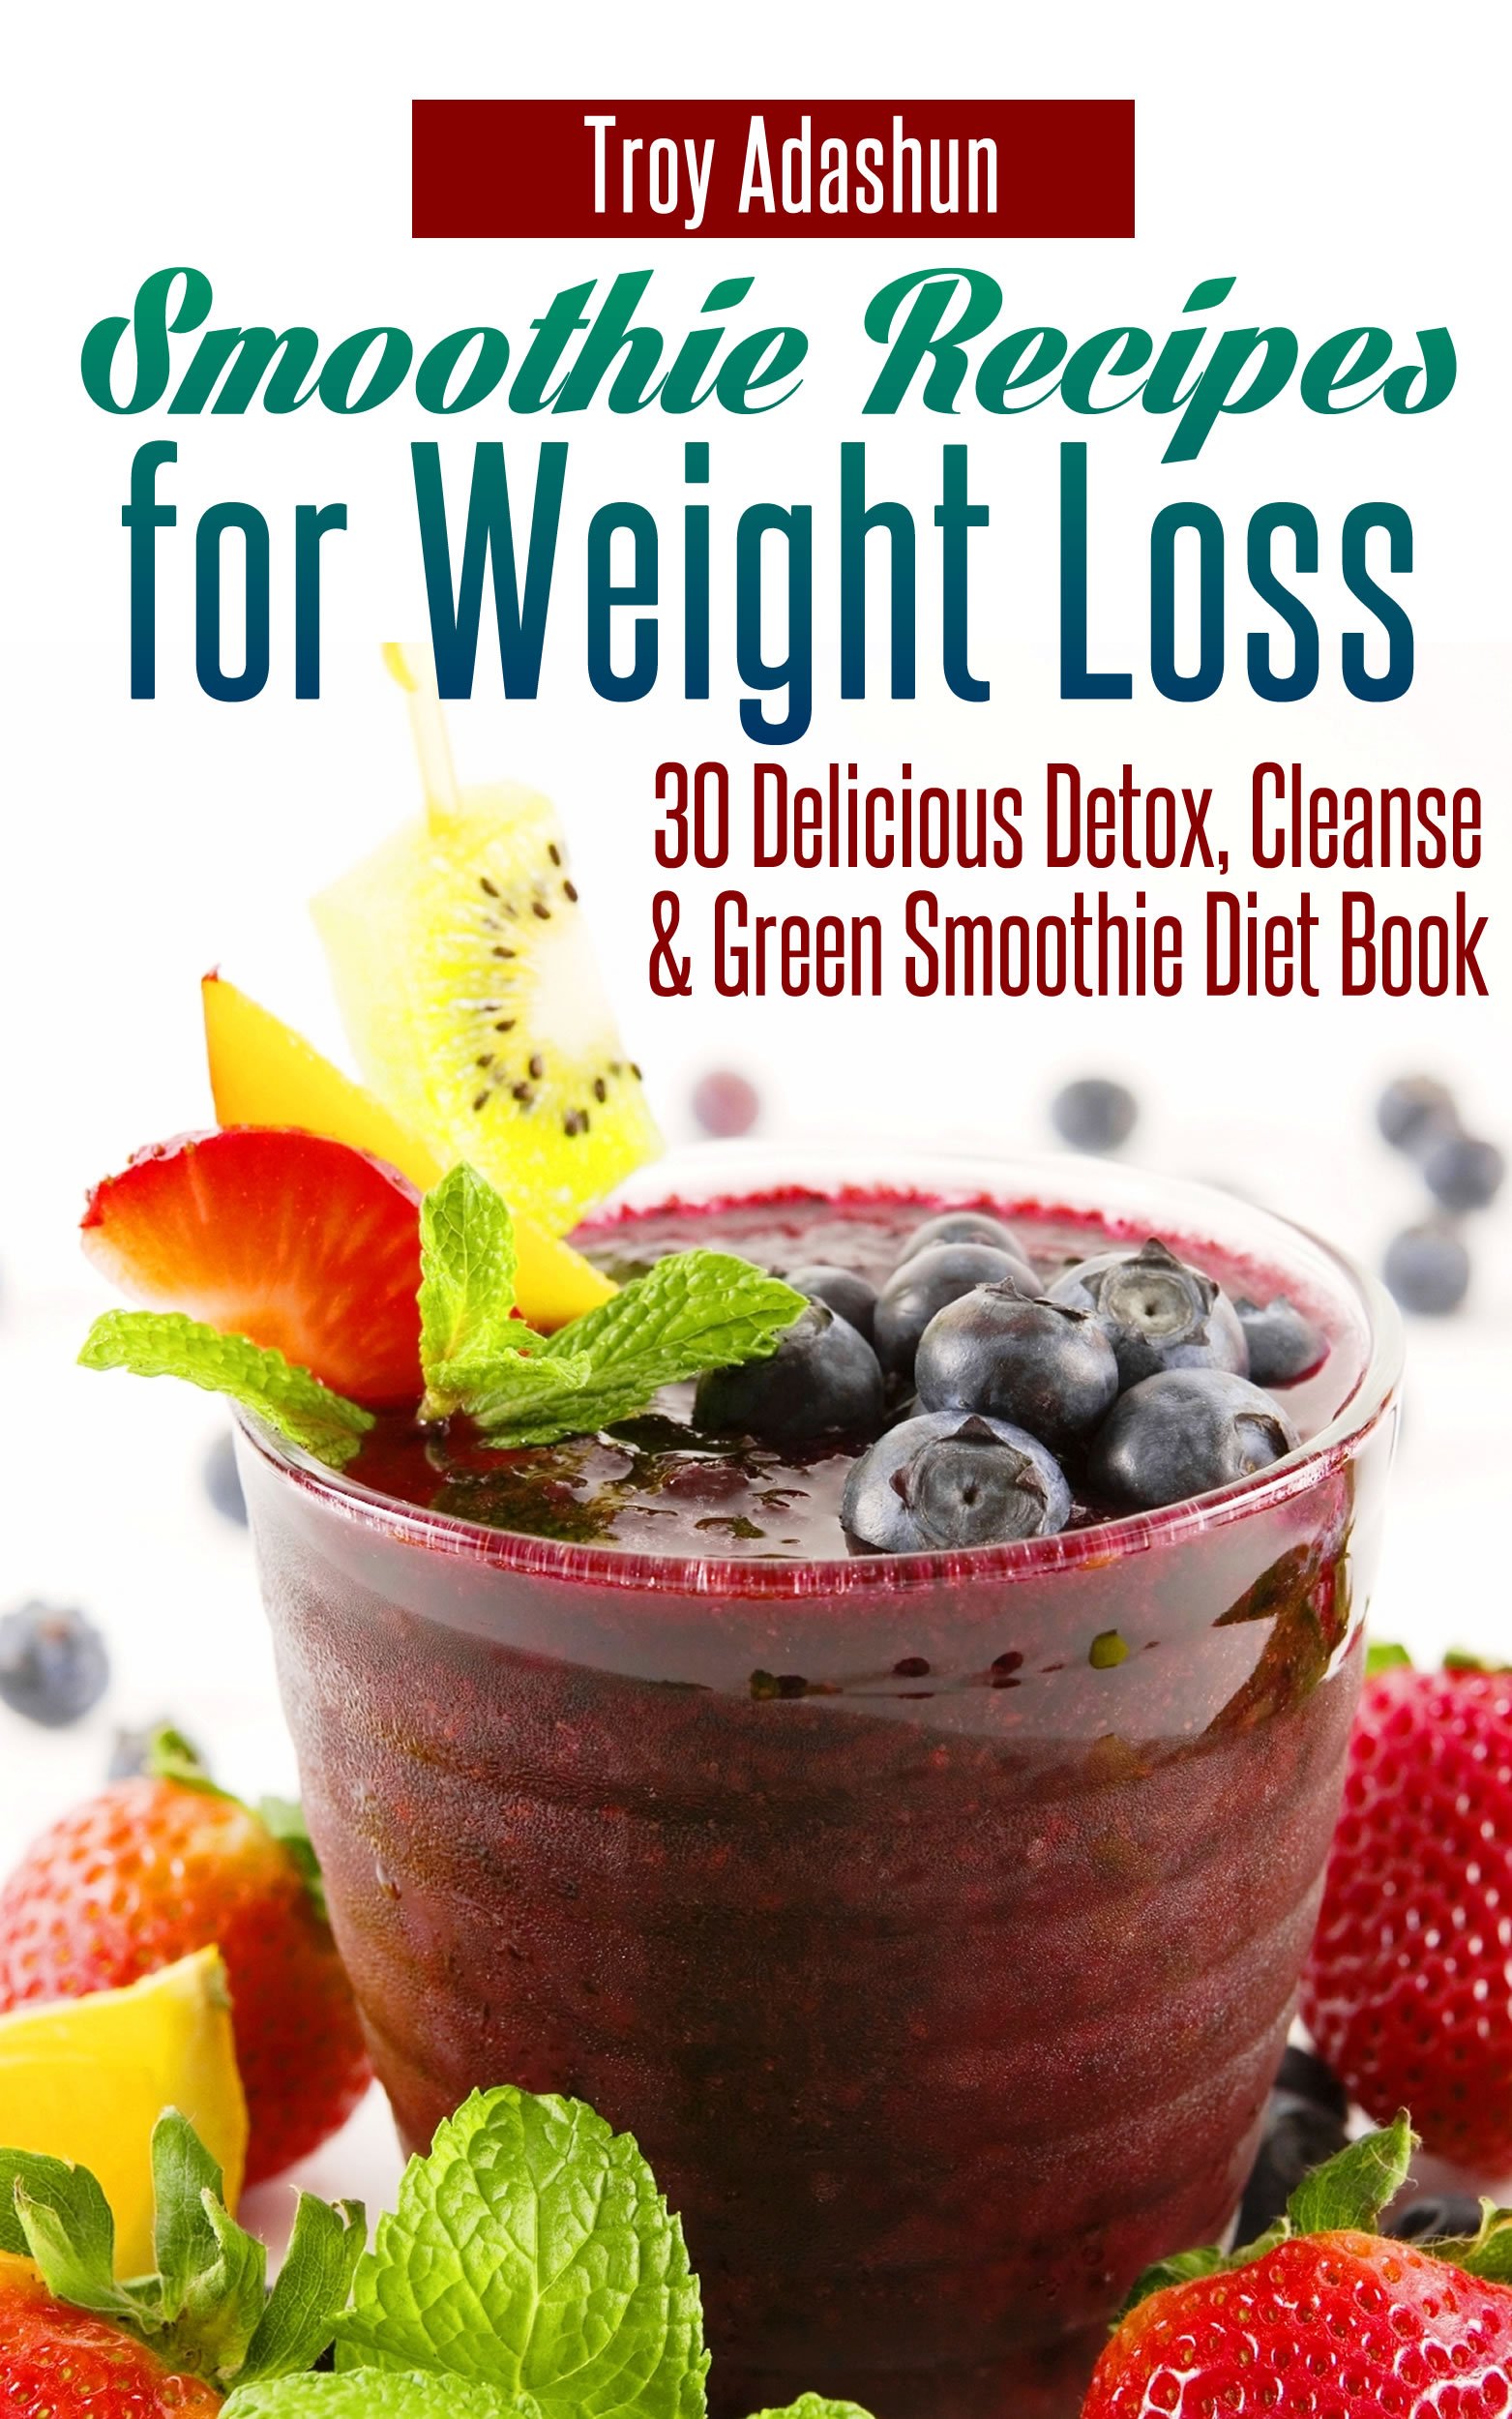 Smashwords  Smoothie Recipes for Weight Loss